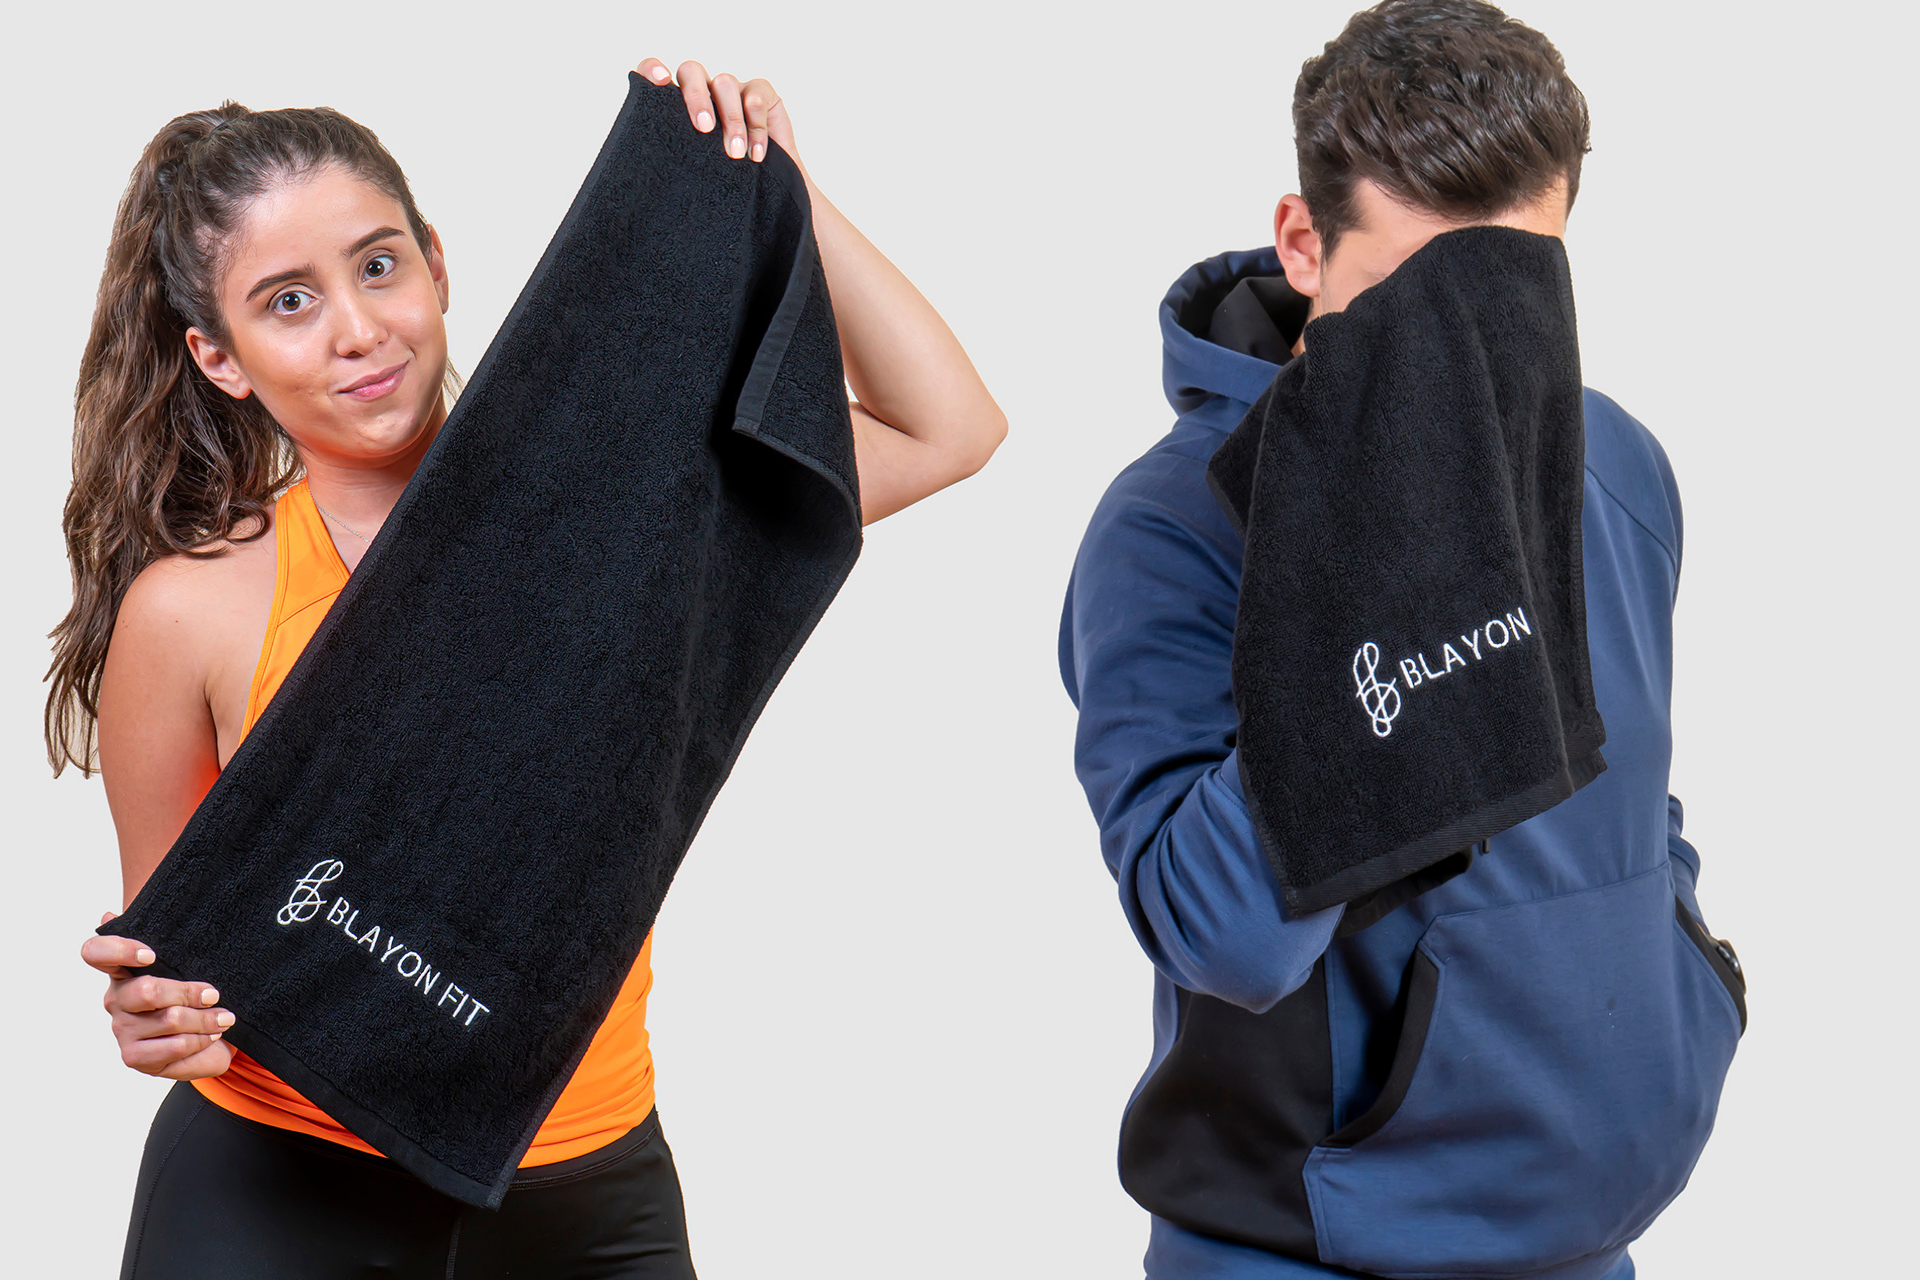 a gir and guy holding gym towel to wipe their sweat